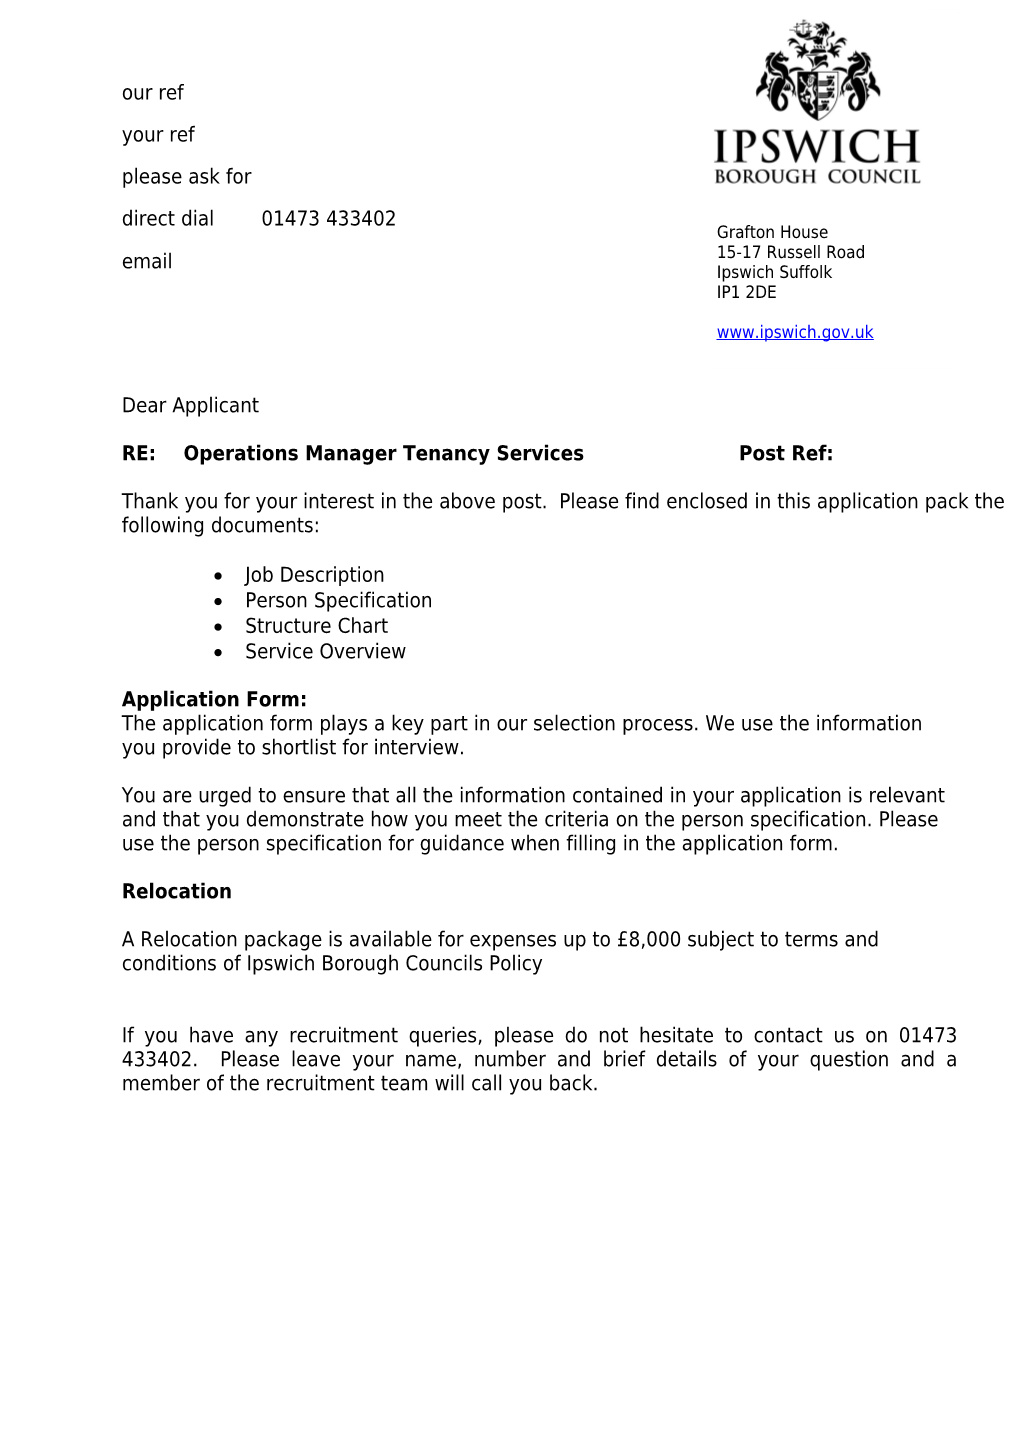 Operations Manager - Tenancy Services